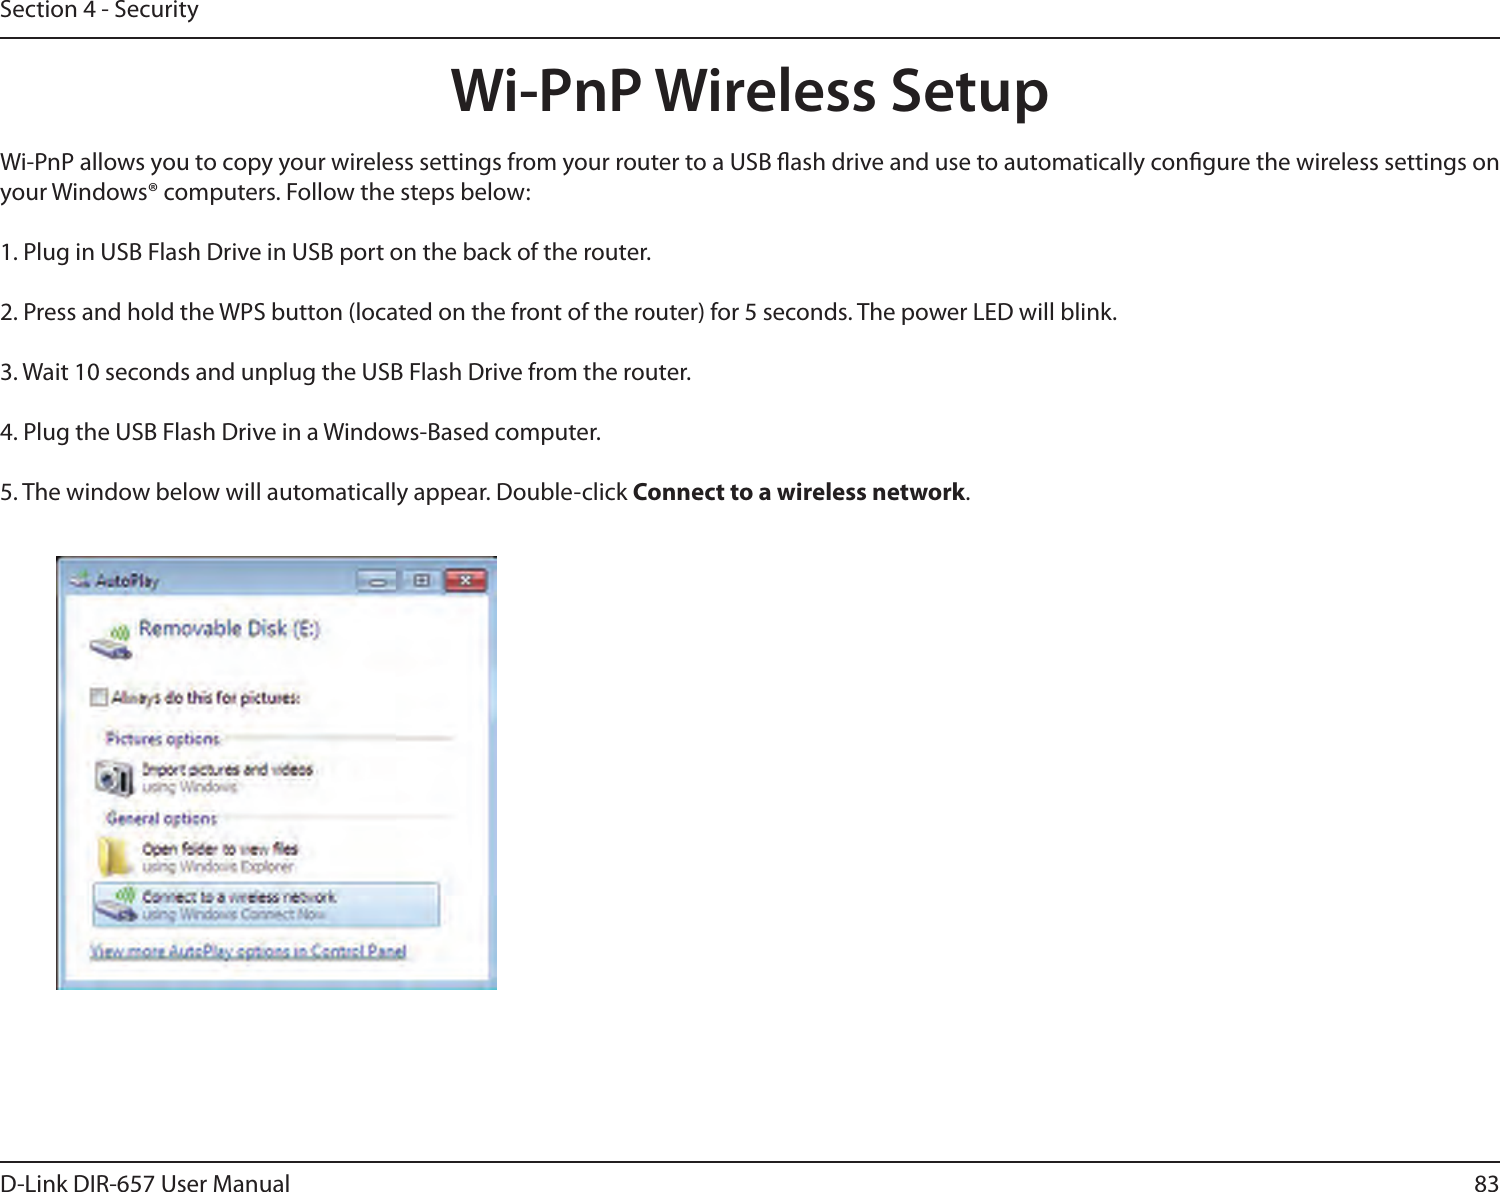 83D-Link DIR-657 User ManualSection 4 - SecurityWi-PnP Wireless SetupWi-PnP allows you to copy your wireless settings from your router to a USB ash drive and use to automatically congure the wireless settings on your Windows® computers. Follow the steps below:1. Plug in USB Flash Drive in USB port on the back of the router.2. Press and hold the WPS button (located on the front of the router) for 5 seconds. The power LED will blink.3. Wait 10 seconds and unplug the USB Flash Drive from the router.4. Plug the USB Flash Drive in a Windows-Based computer. 5. The window below will automatically appear. Double-click Connect to a wireless network.